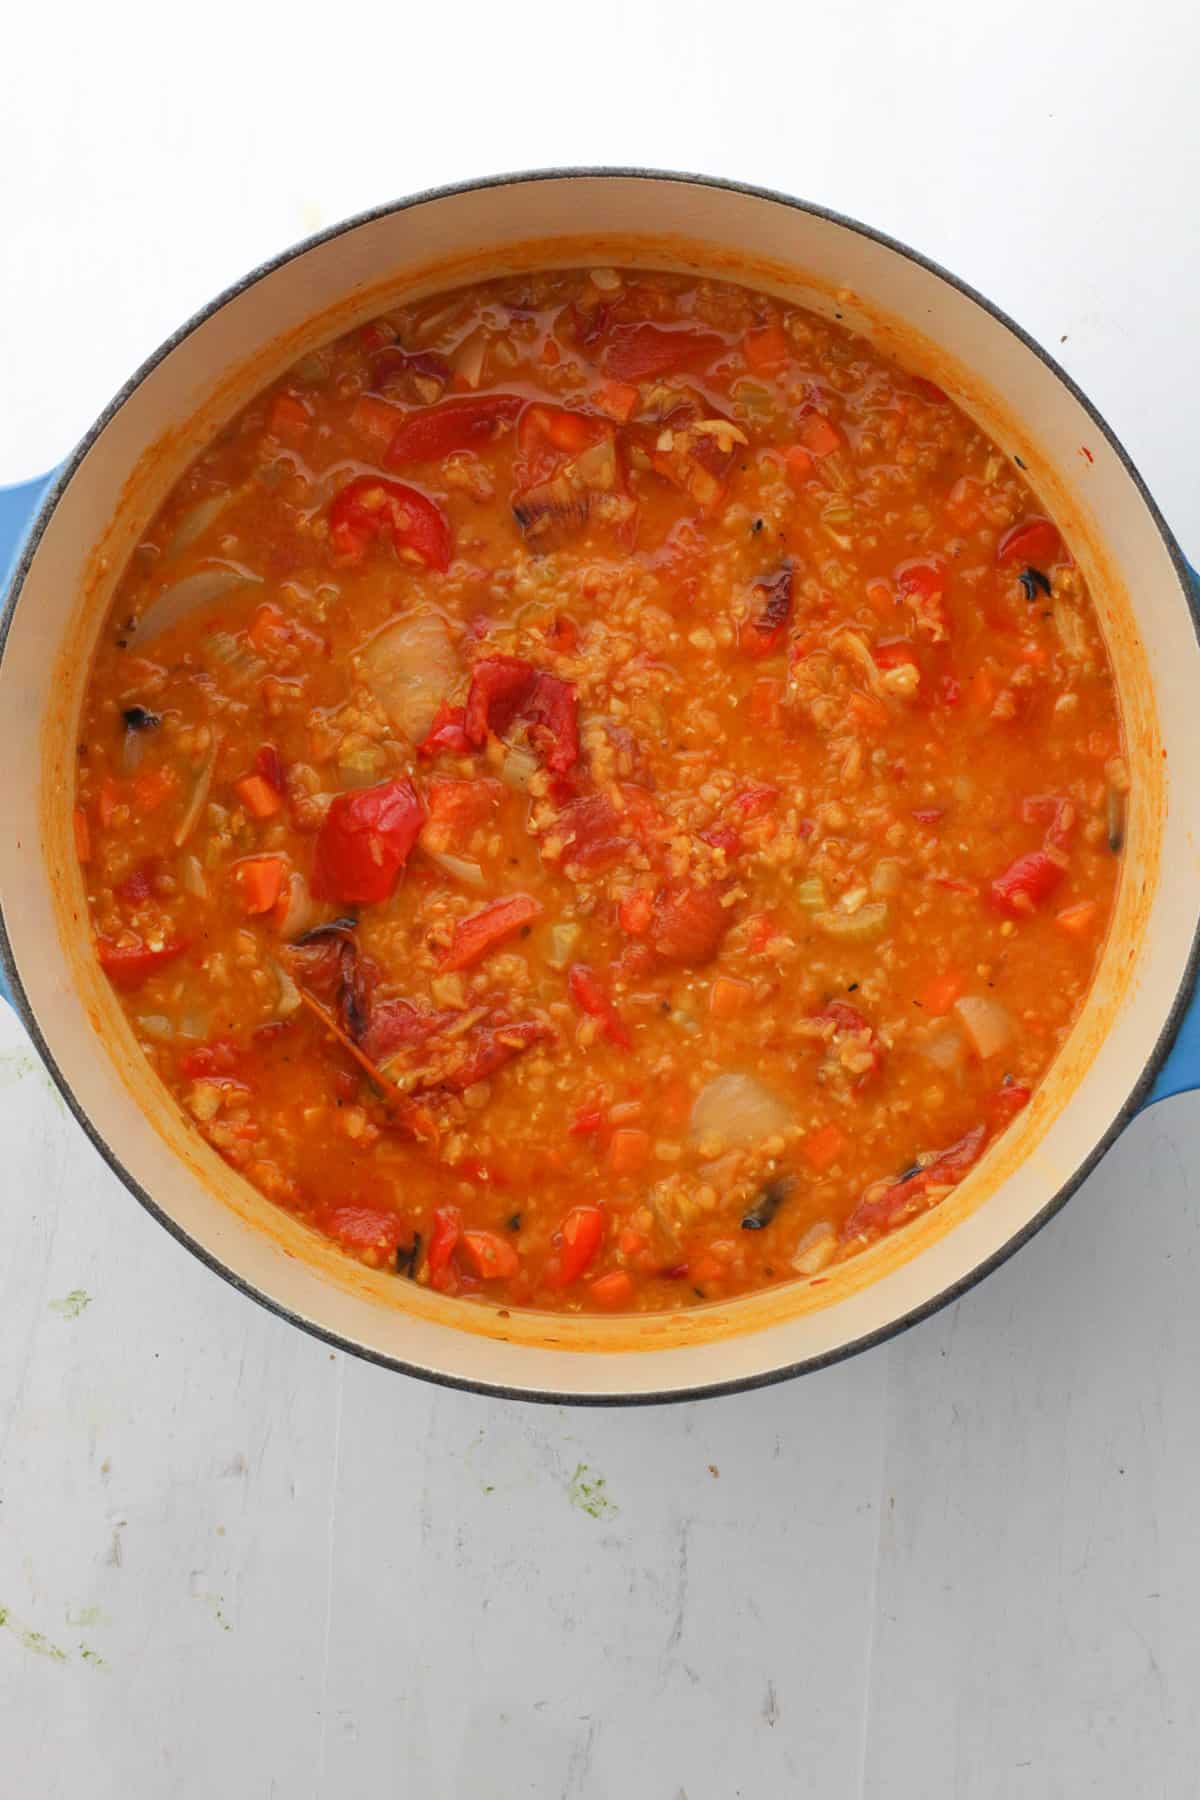 A Dutch oven with lentil and red pepper soup cooking.